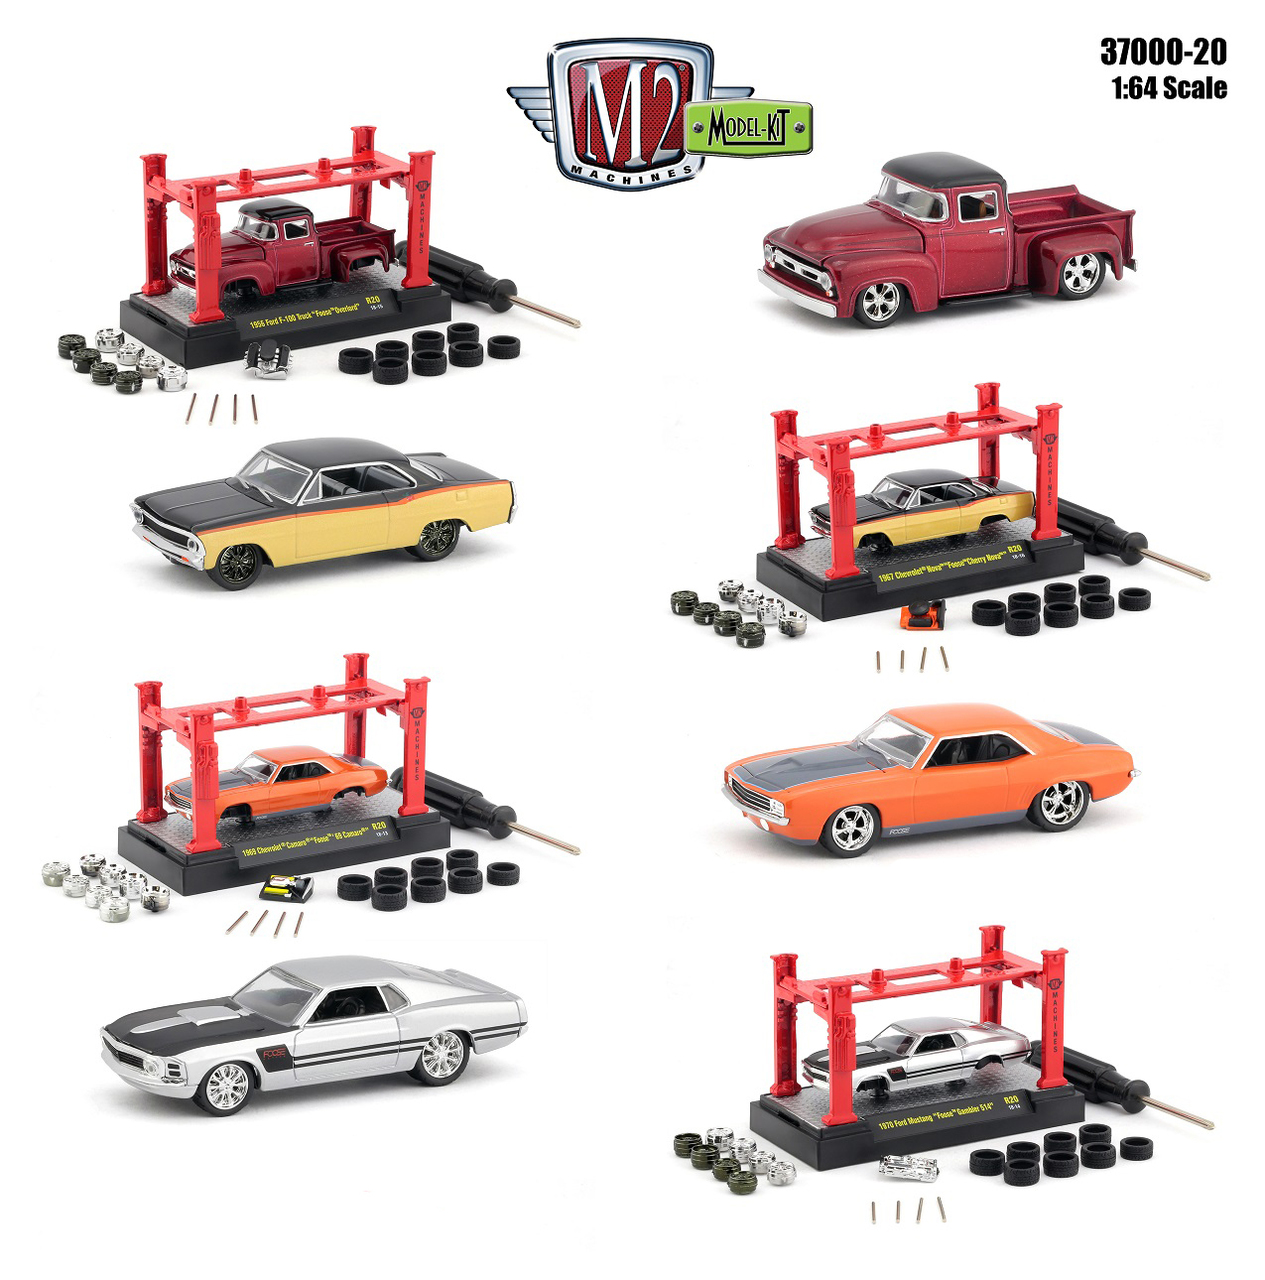 Model Kit 4 Pieces Set Release 20 1/64 Diecast Model Cars By M2 Machines